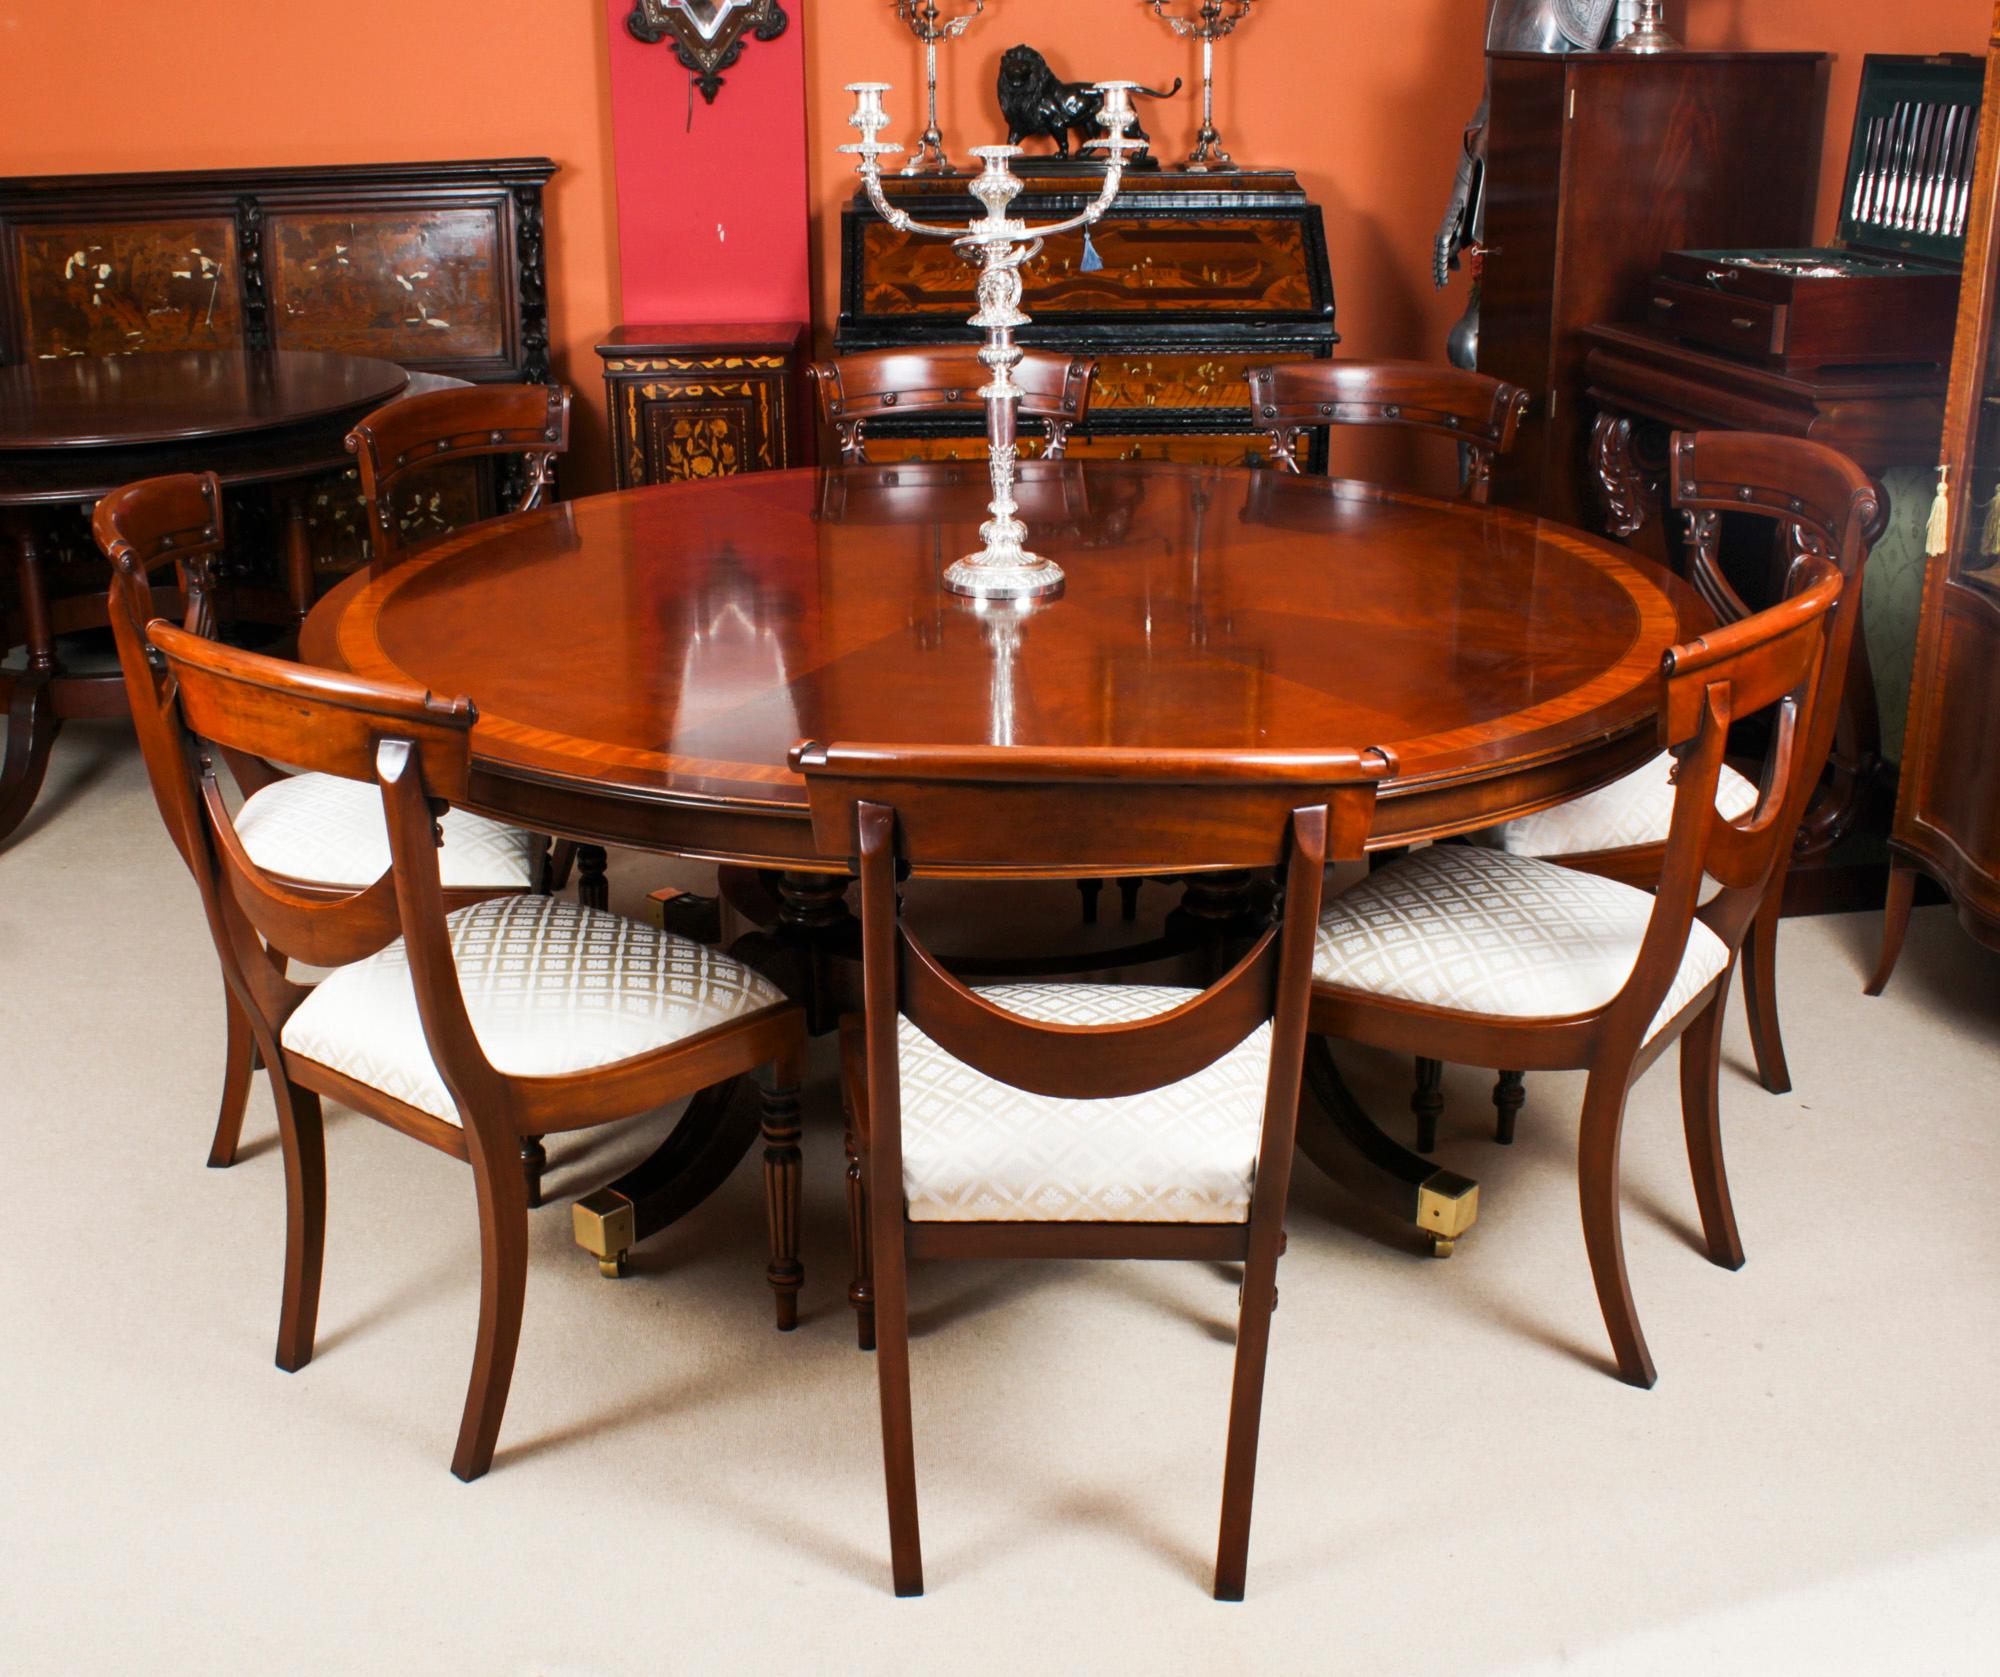 A beautiful Vintage Regency Revival dining table complete with the matching set of eight Regency style swagback dining chairs.

The flame mahogany veneers on the top have been arranged so as to give a sunburst effect and it is finished off by the